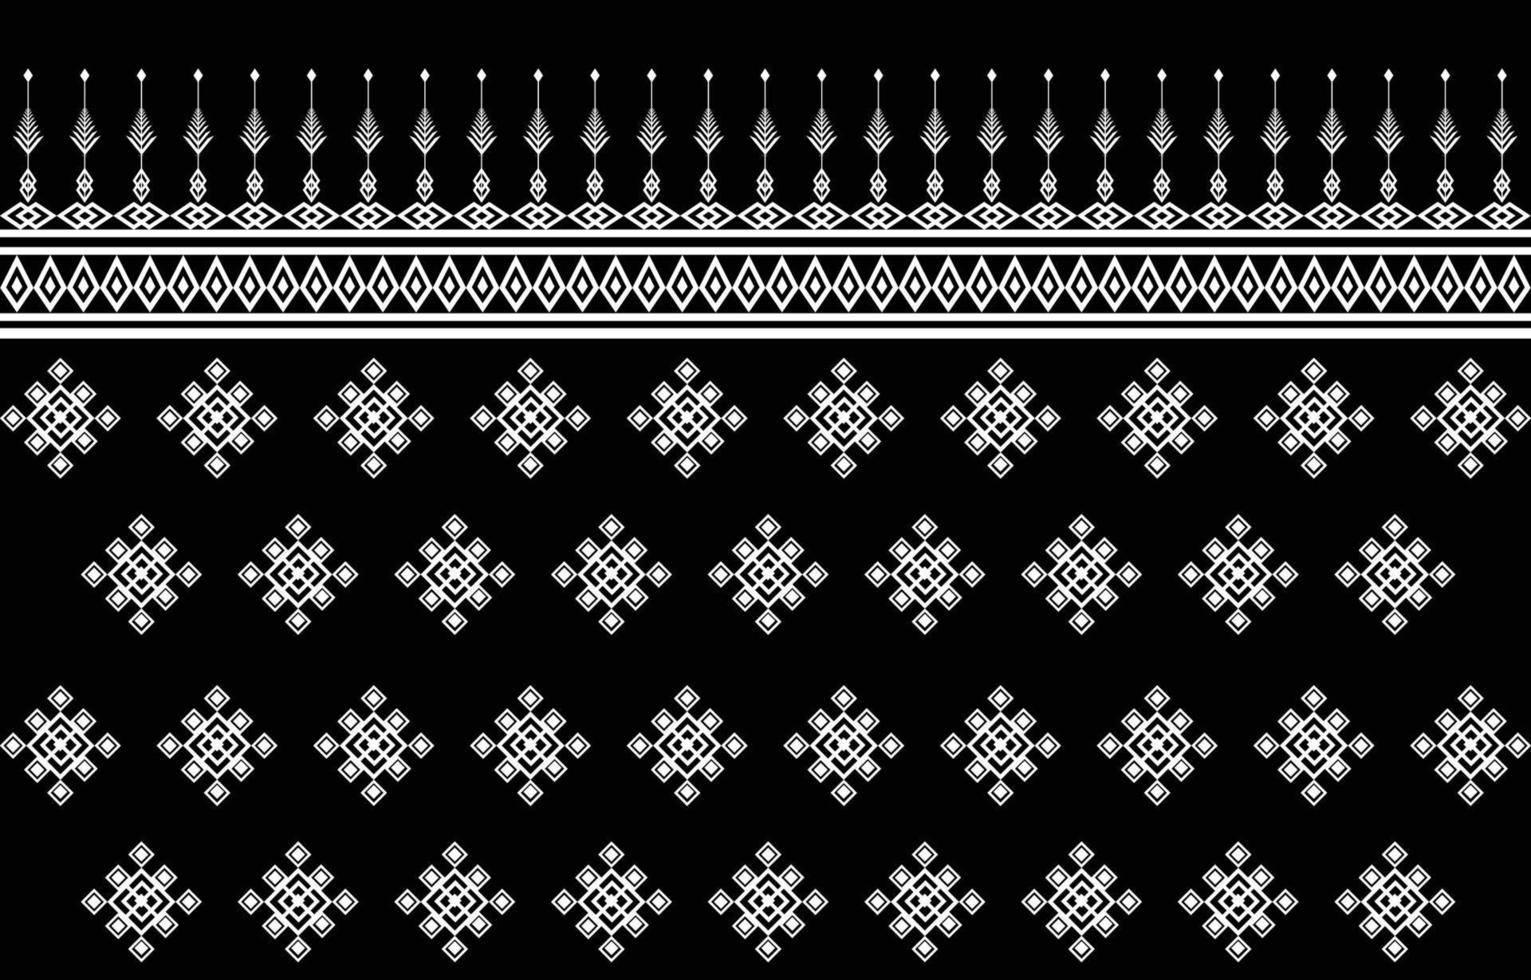 American fabric pattern design. Use geometry to create a fabric pattern. Design for textile industry, background, carpet, wallpaper, clothing, Batik, and ethnic fabric. vector